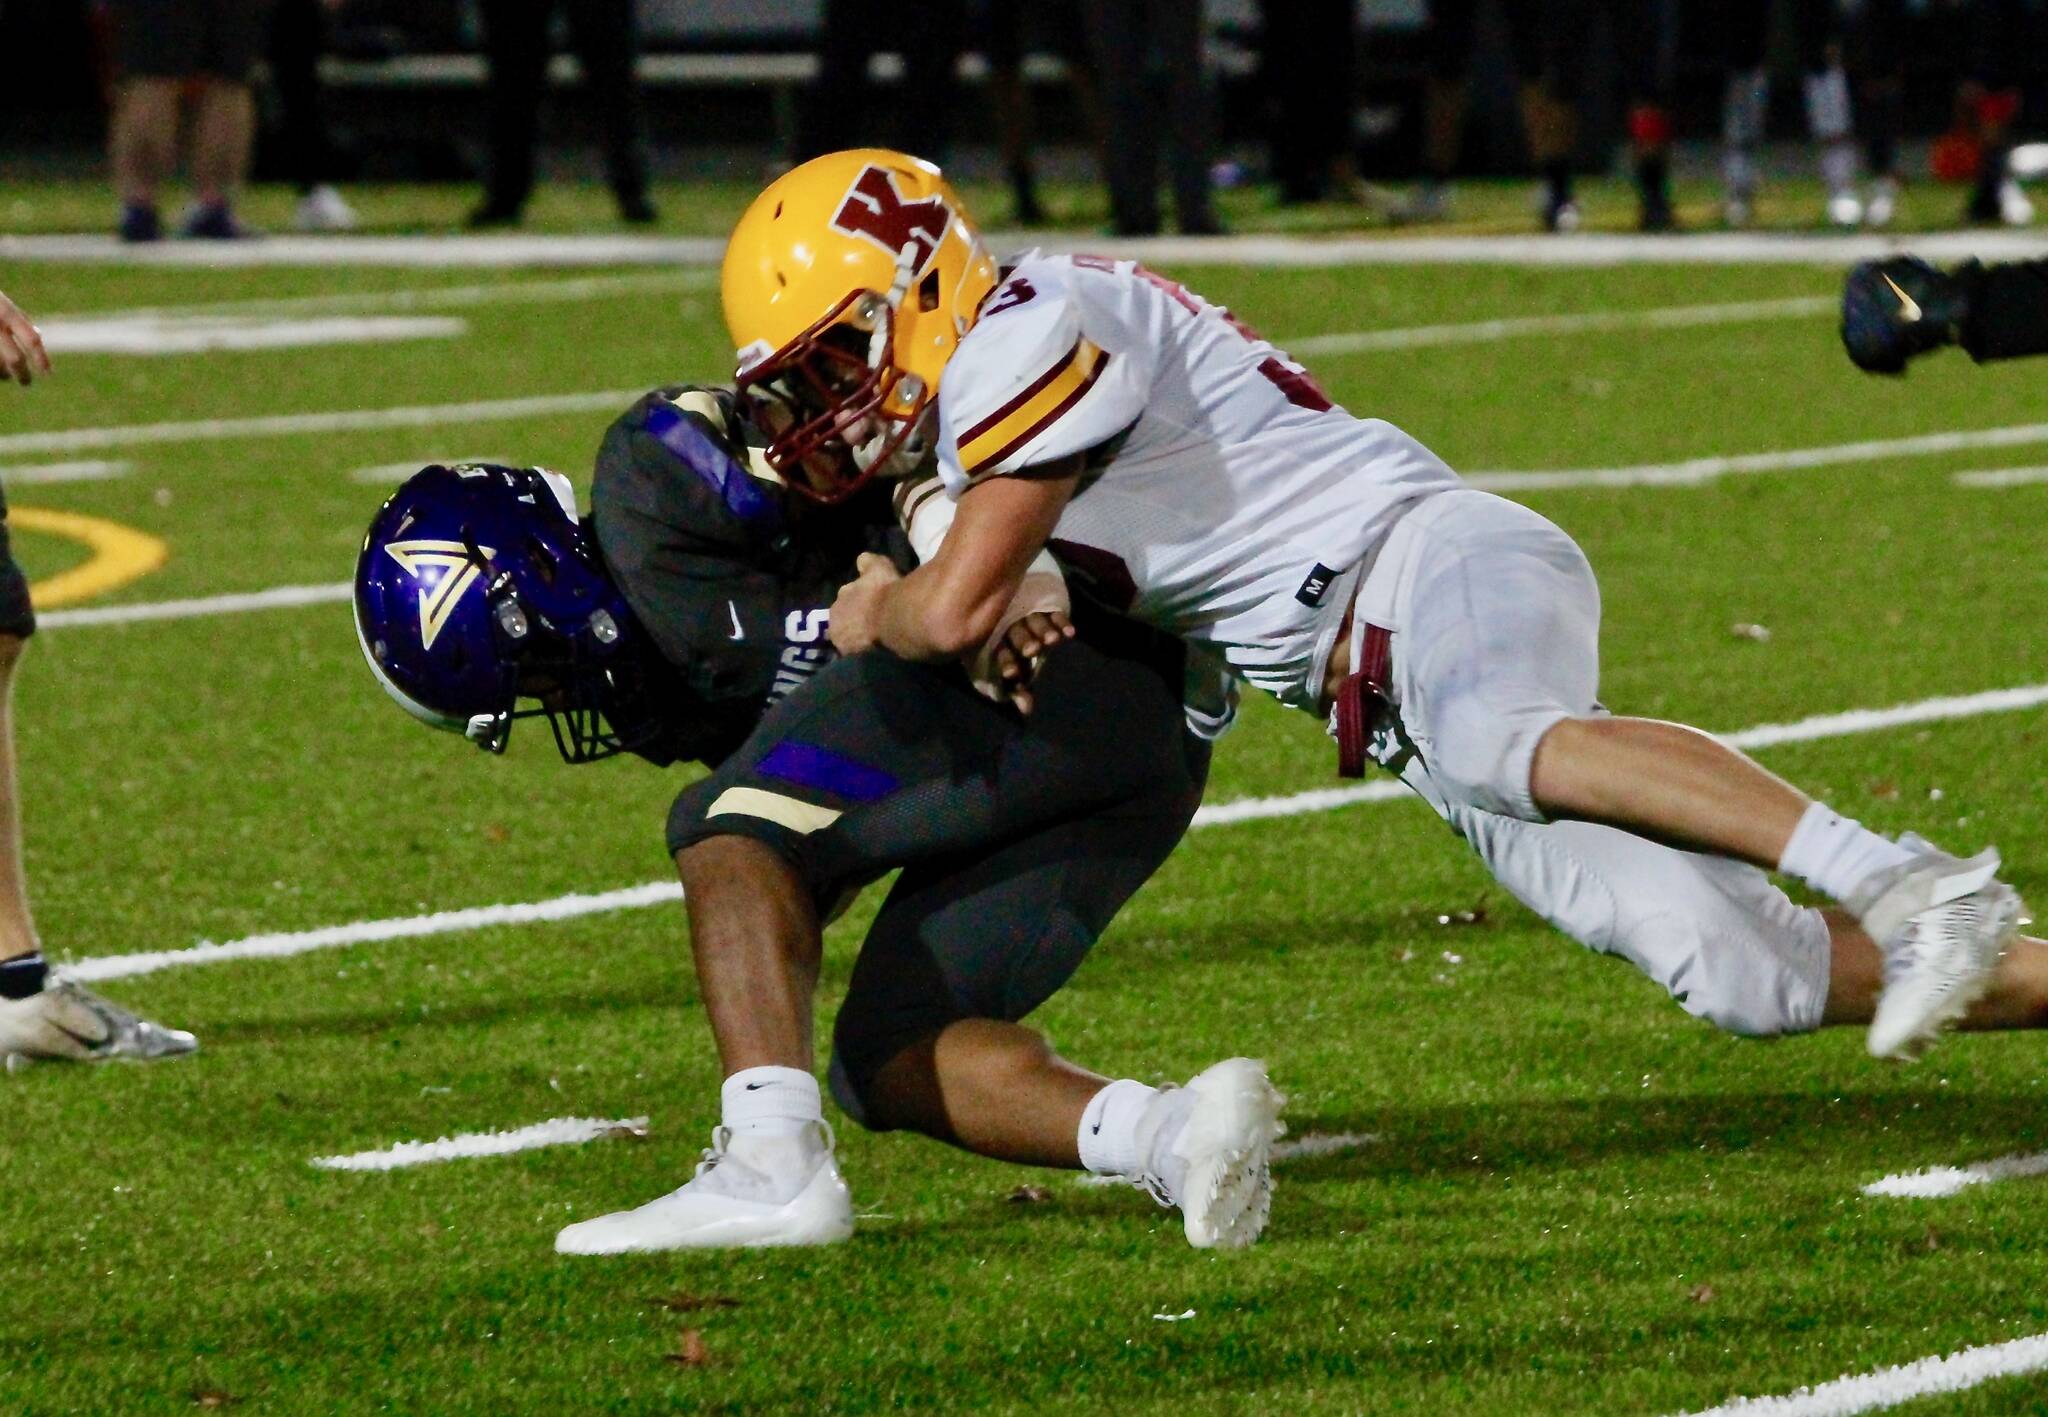 Kingston’s Camden Singer shoots through the line to make a tackle in the backfield against North Kitsap. (Mark Krulish/Kitsap News Group)